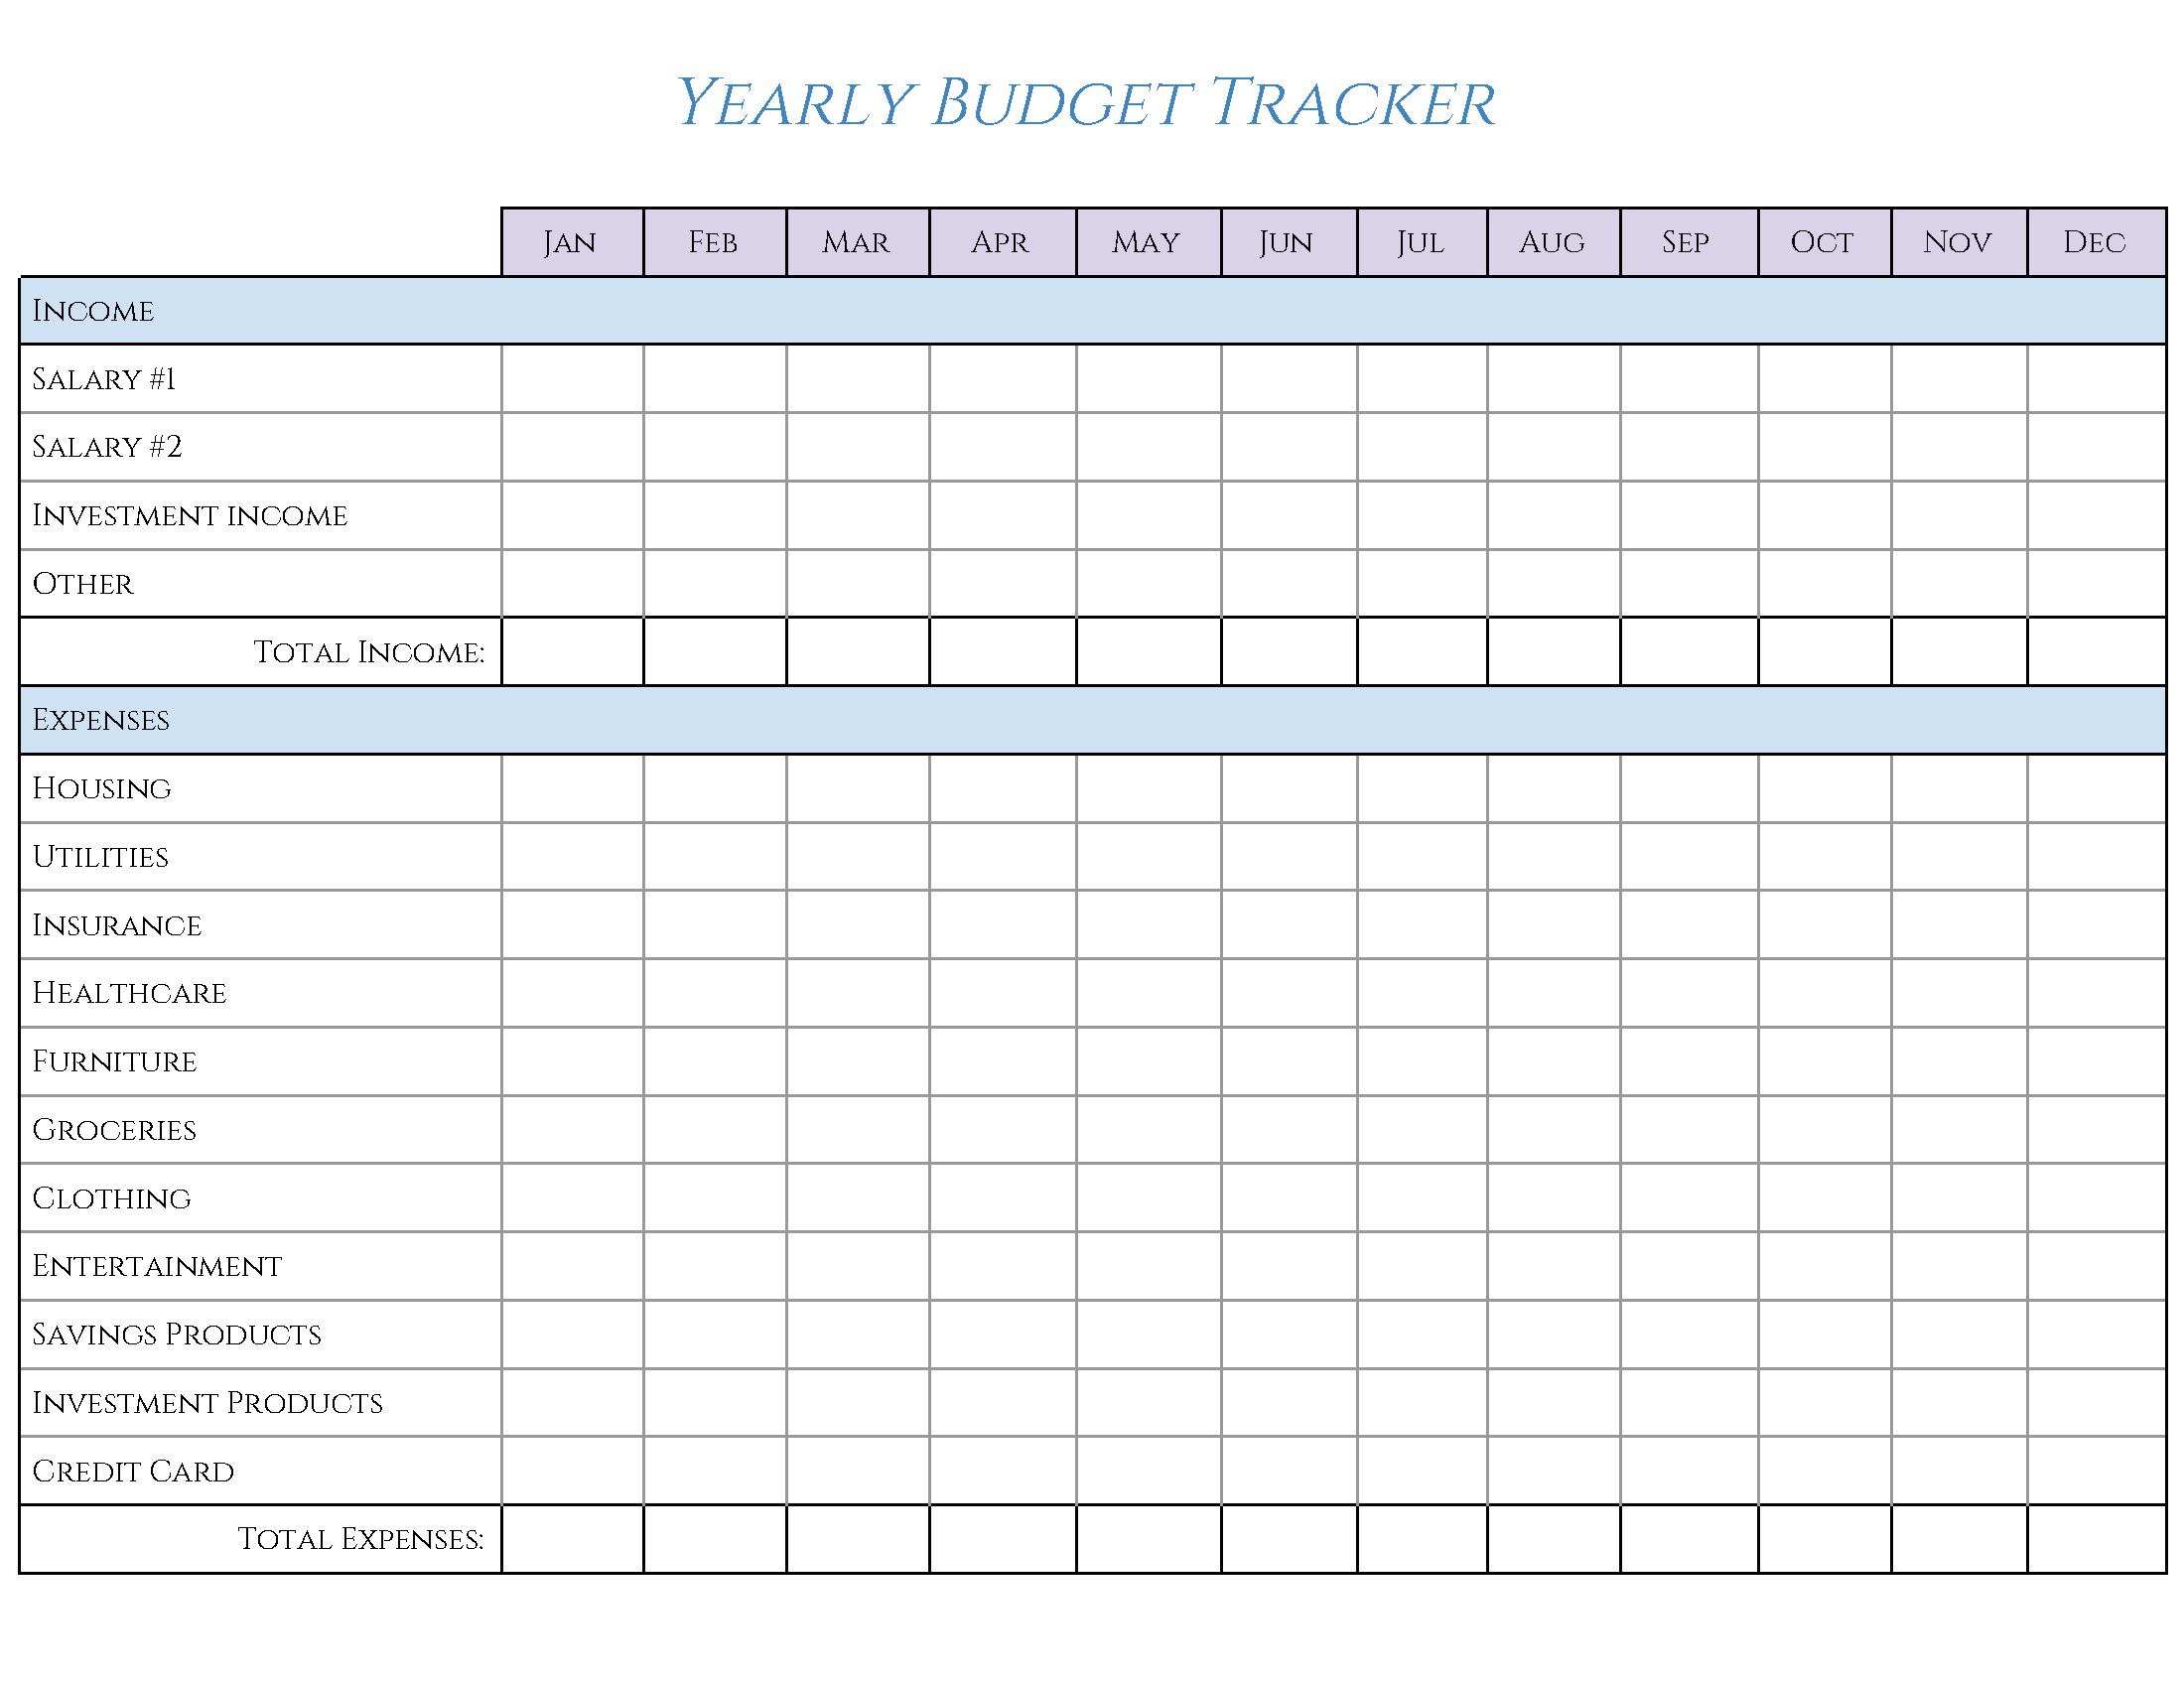 daily-budget-forms-printable-printable-forms-free-online